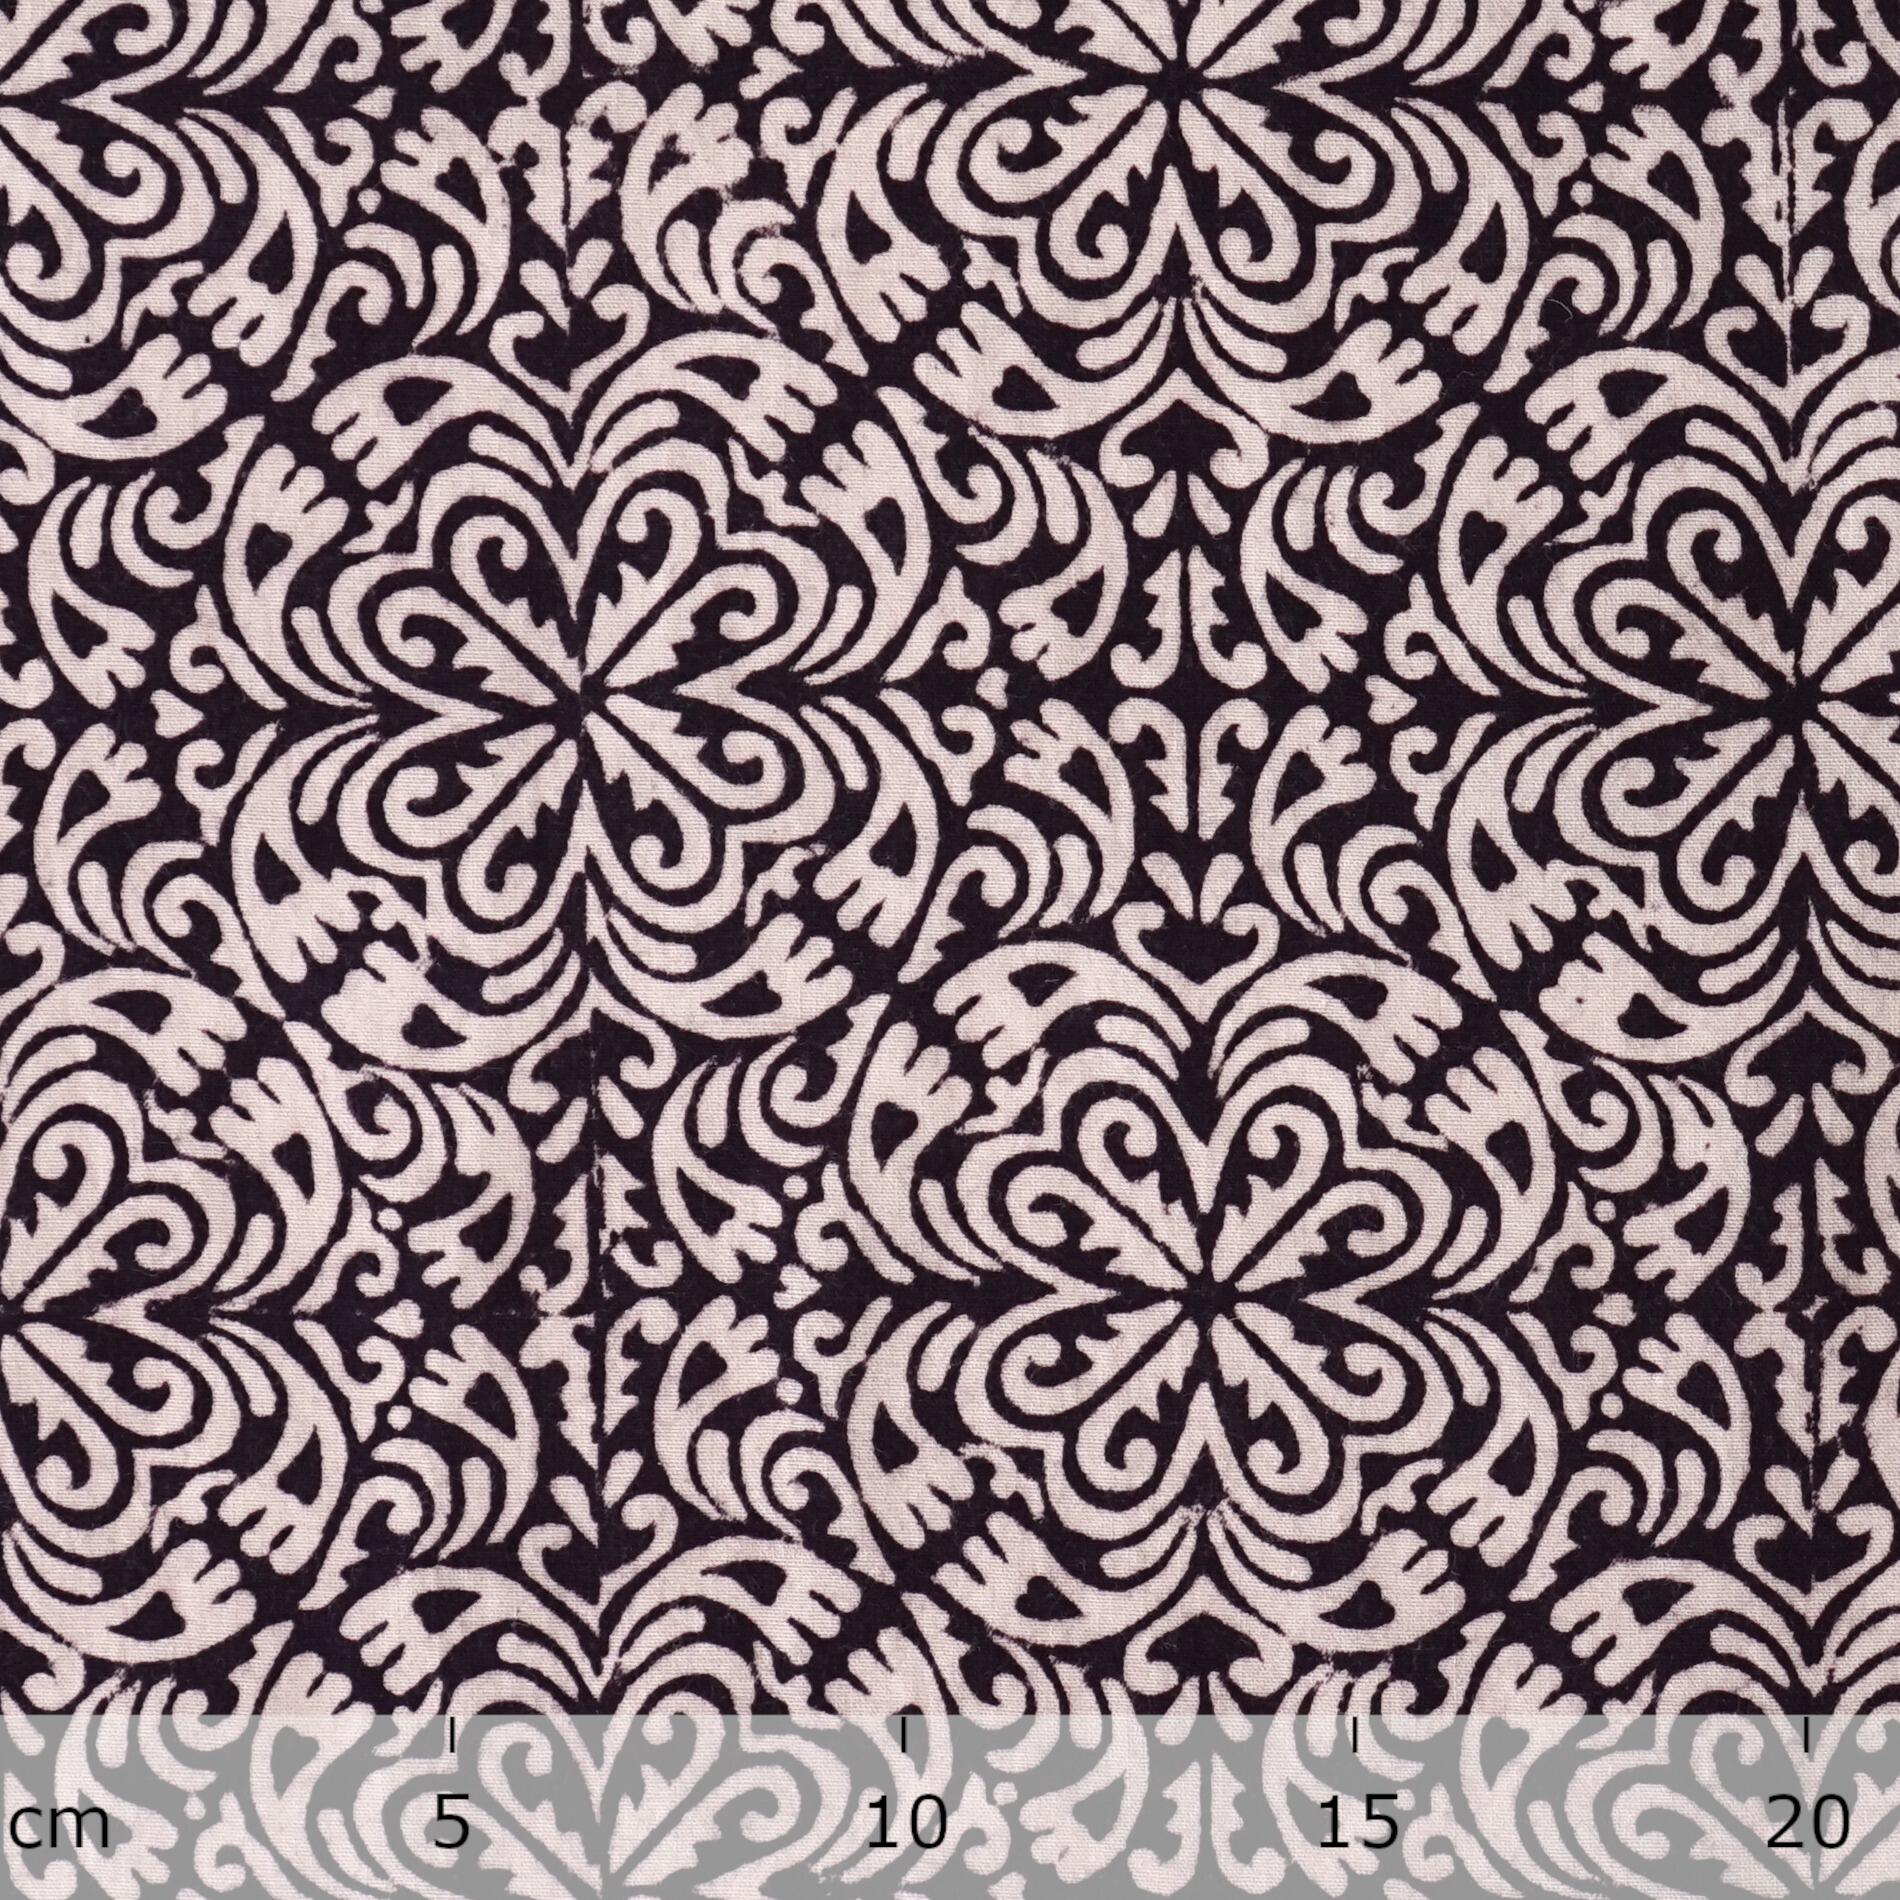 100% Block-Printed Cotton Fabric From India - Bagh Printing Method - Psychadelia Design - Ruler